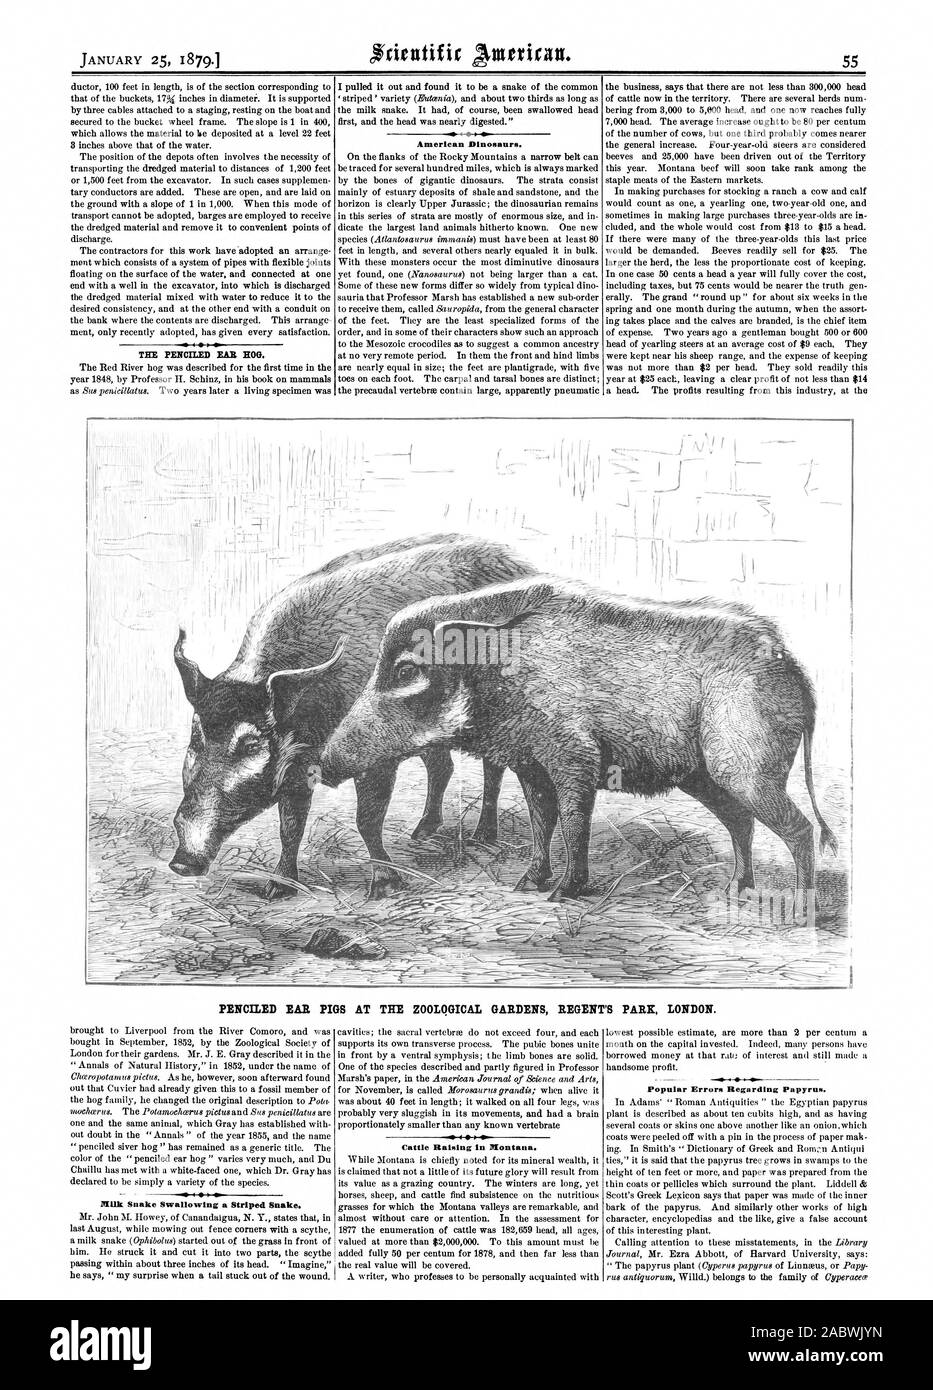 TEl PENCILED EAR HOG. American Dinosaurs. PENCILED EAR PIGS AT THE ZOOLOGICAL GARDENS REGENT'S PARK LONDON. Milk Snake Swallowing a Striped Snake. Cattle Raising In Montana. Popular Errors Regarding Papyrus., scientific american, 1879-01-25 Stock Photo